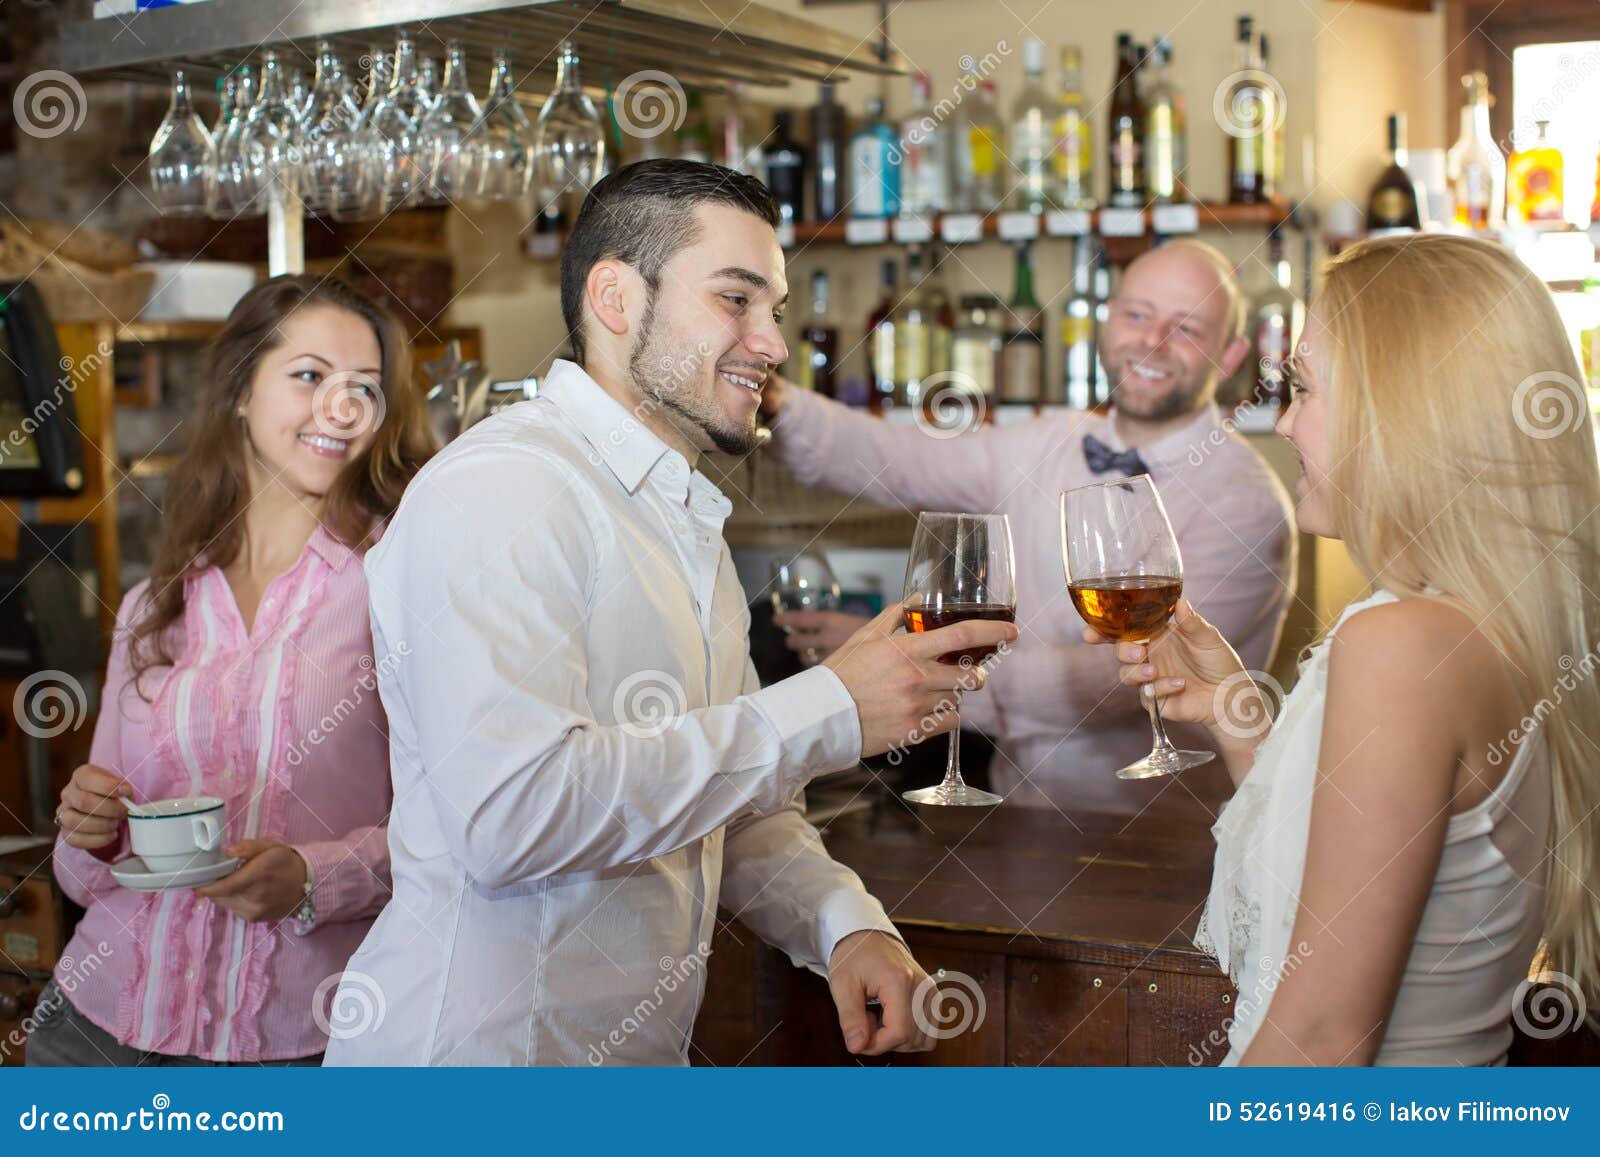 Bartender Entertaining Guests Stock Photo - Image: 52619416